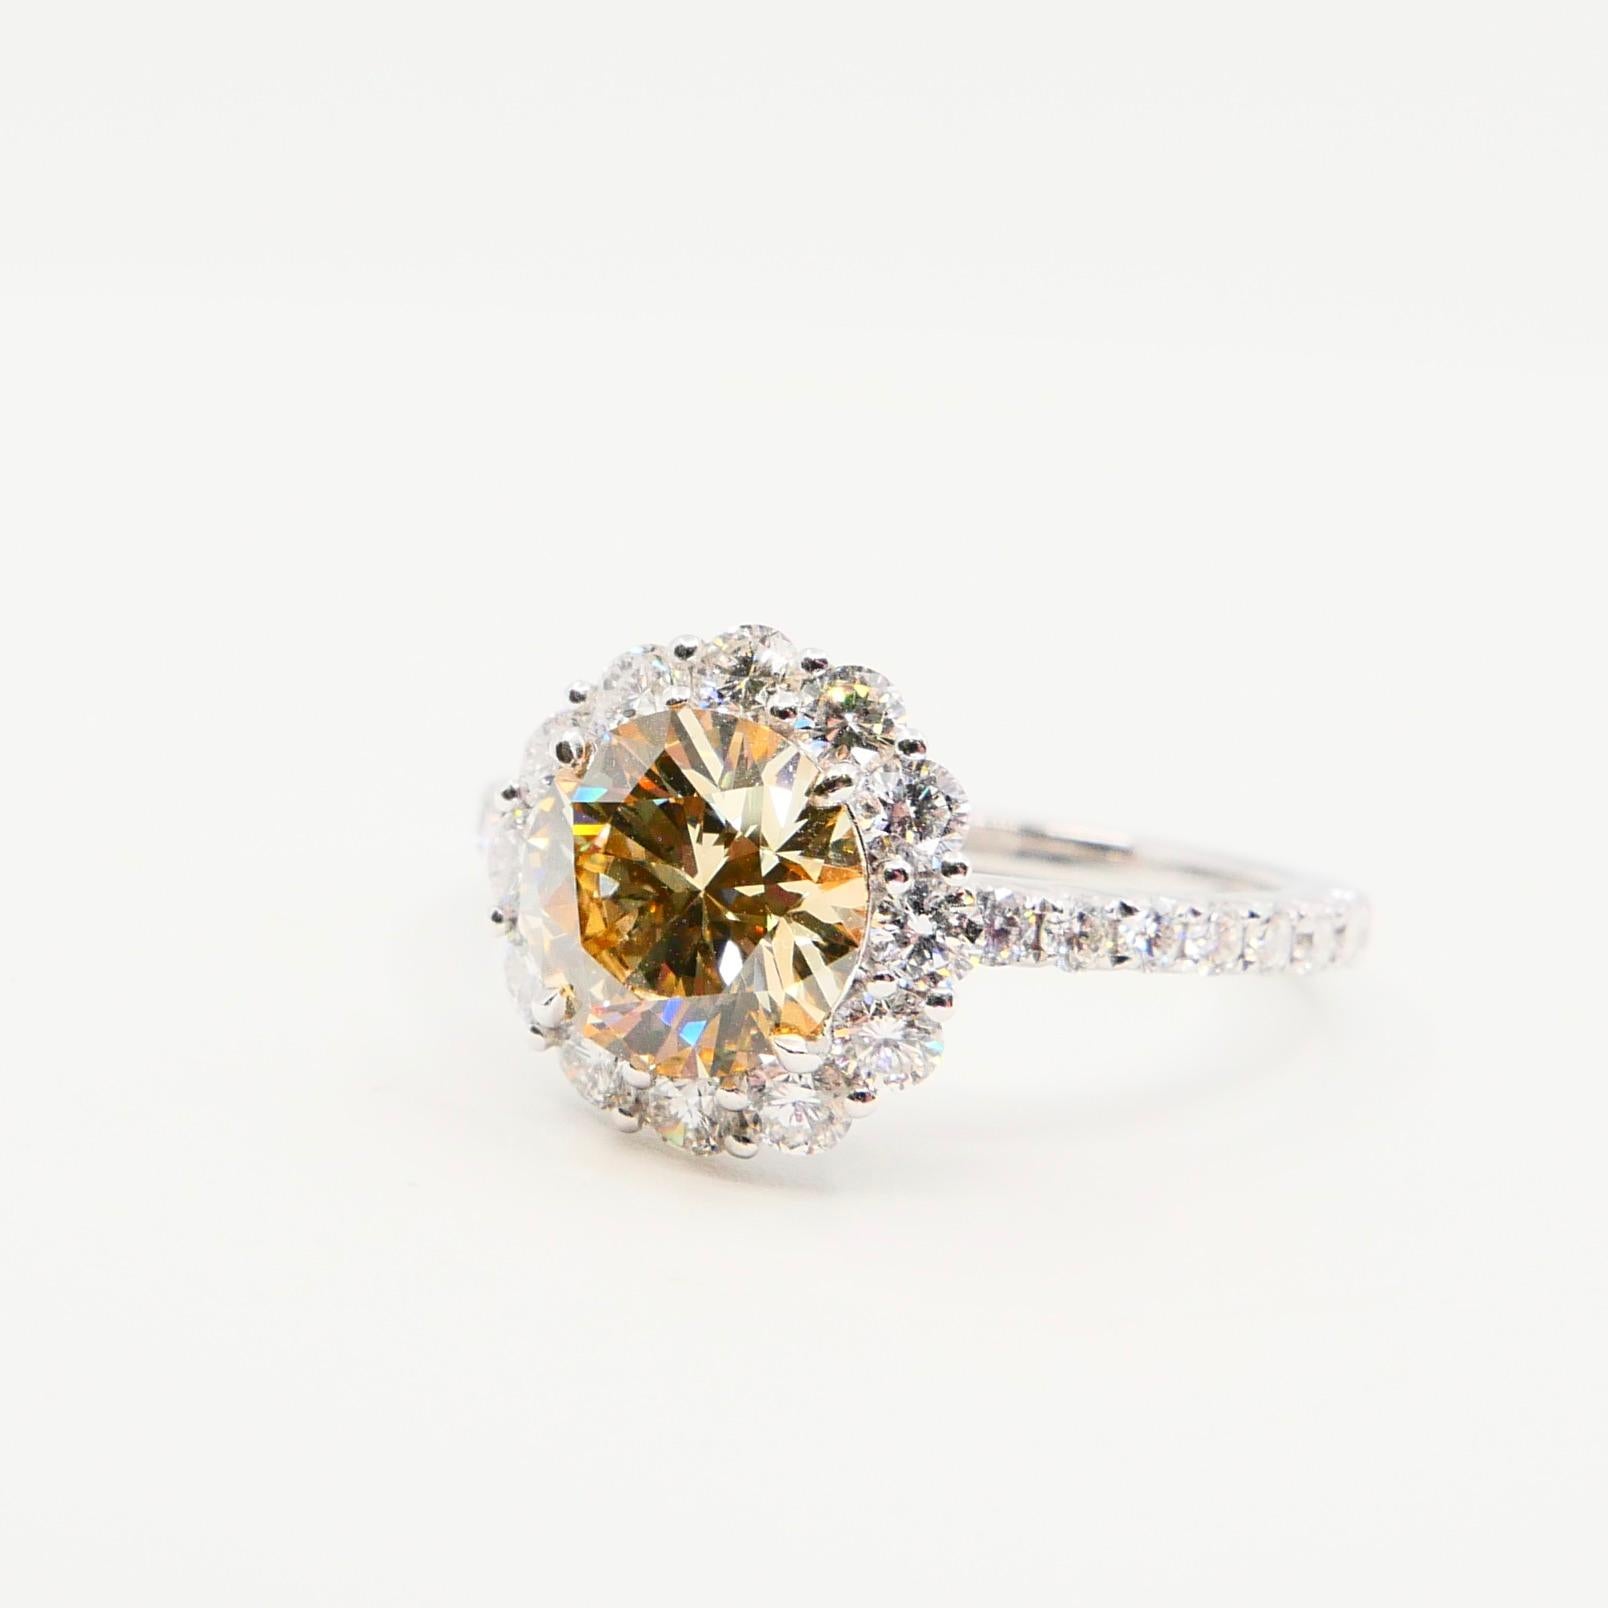 GIA Certified 1.23 Fancy Light Brownish Yellow Diamond Cocktail Ring VS2 Clarity 5